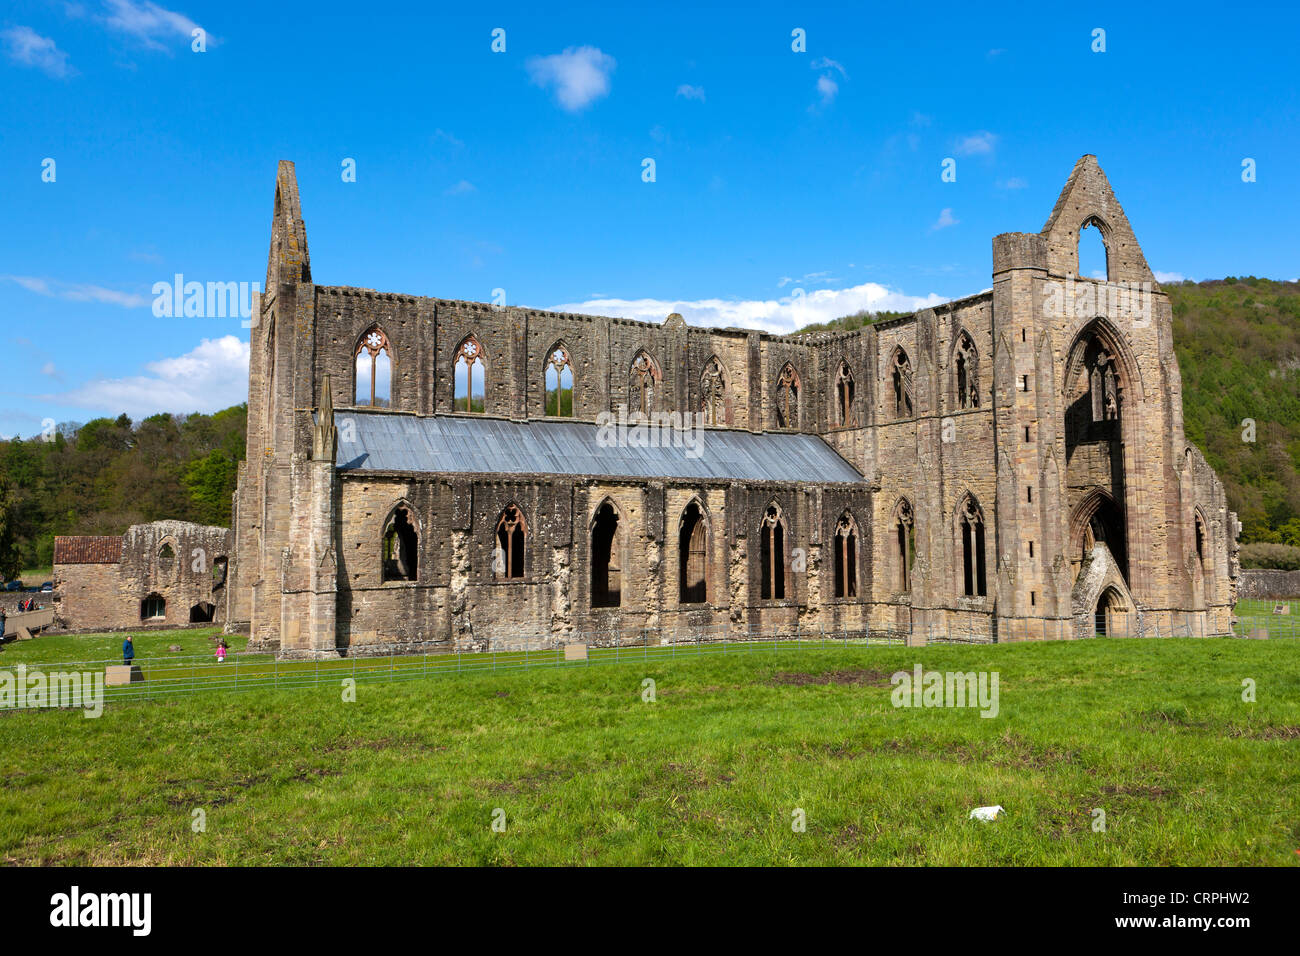 The ruins of Tintern Abbey, a Cistercian Abbey founded in the 12th century by Walter de Clare, Lord of Chepstow. Stock Photo